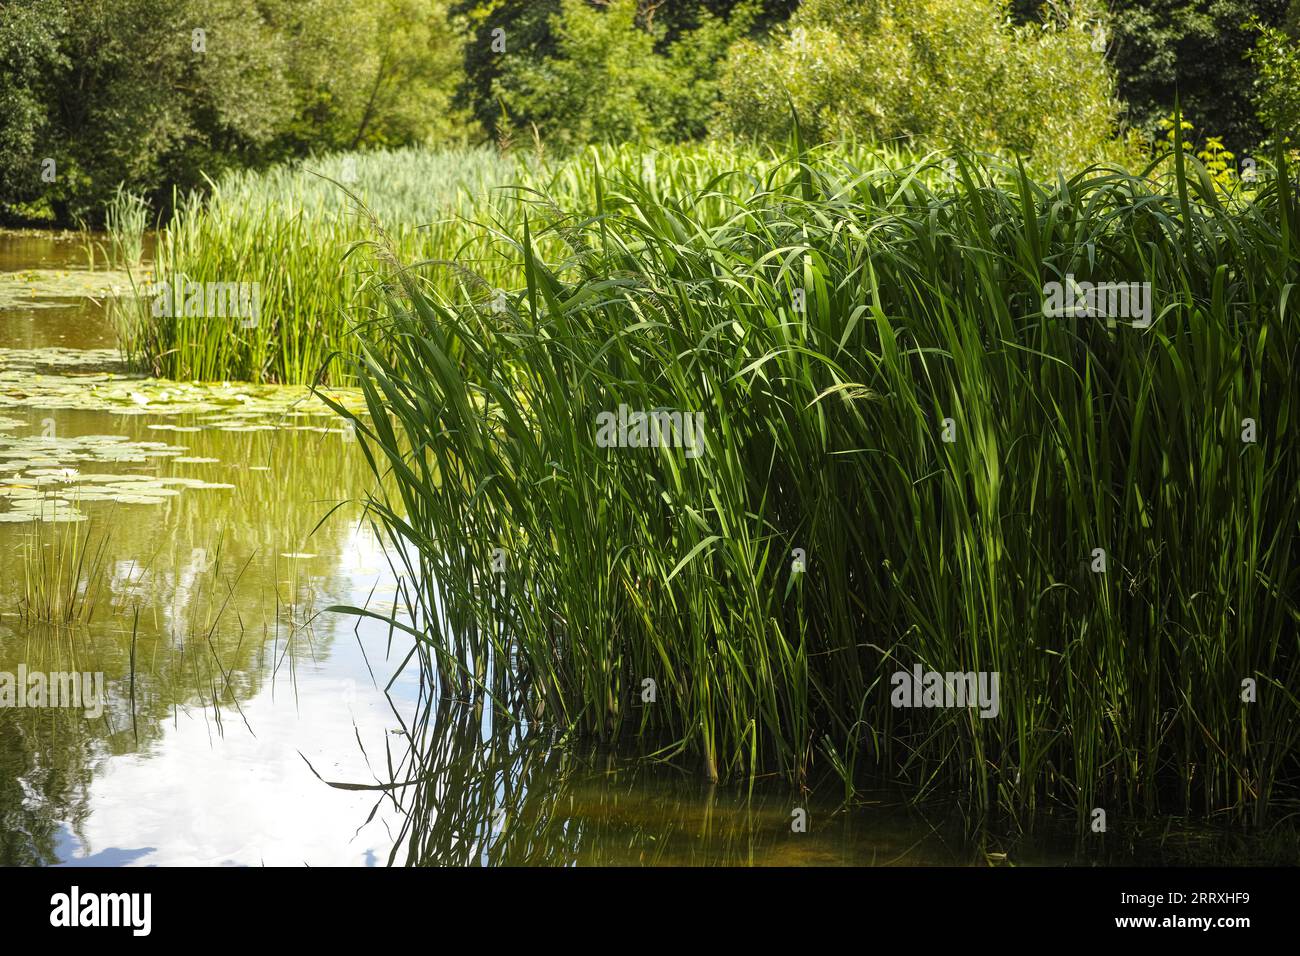 Tall sedge family grasses growing in a river. Summertime Stock Photo